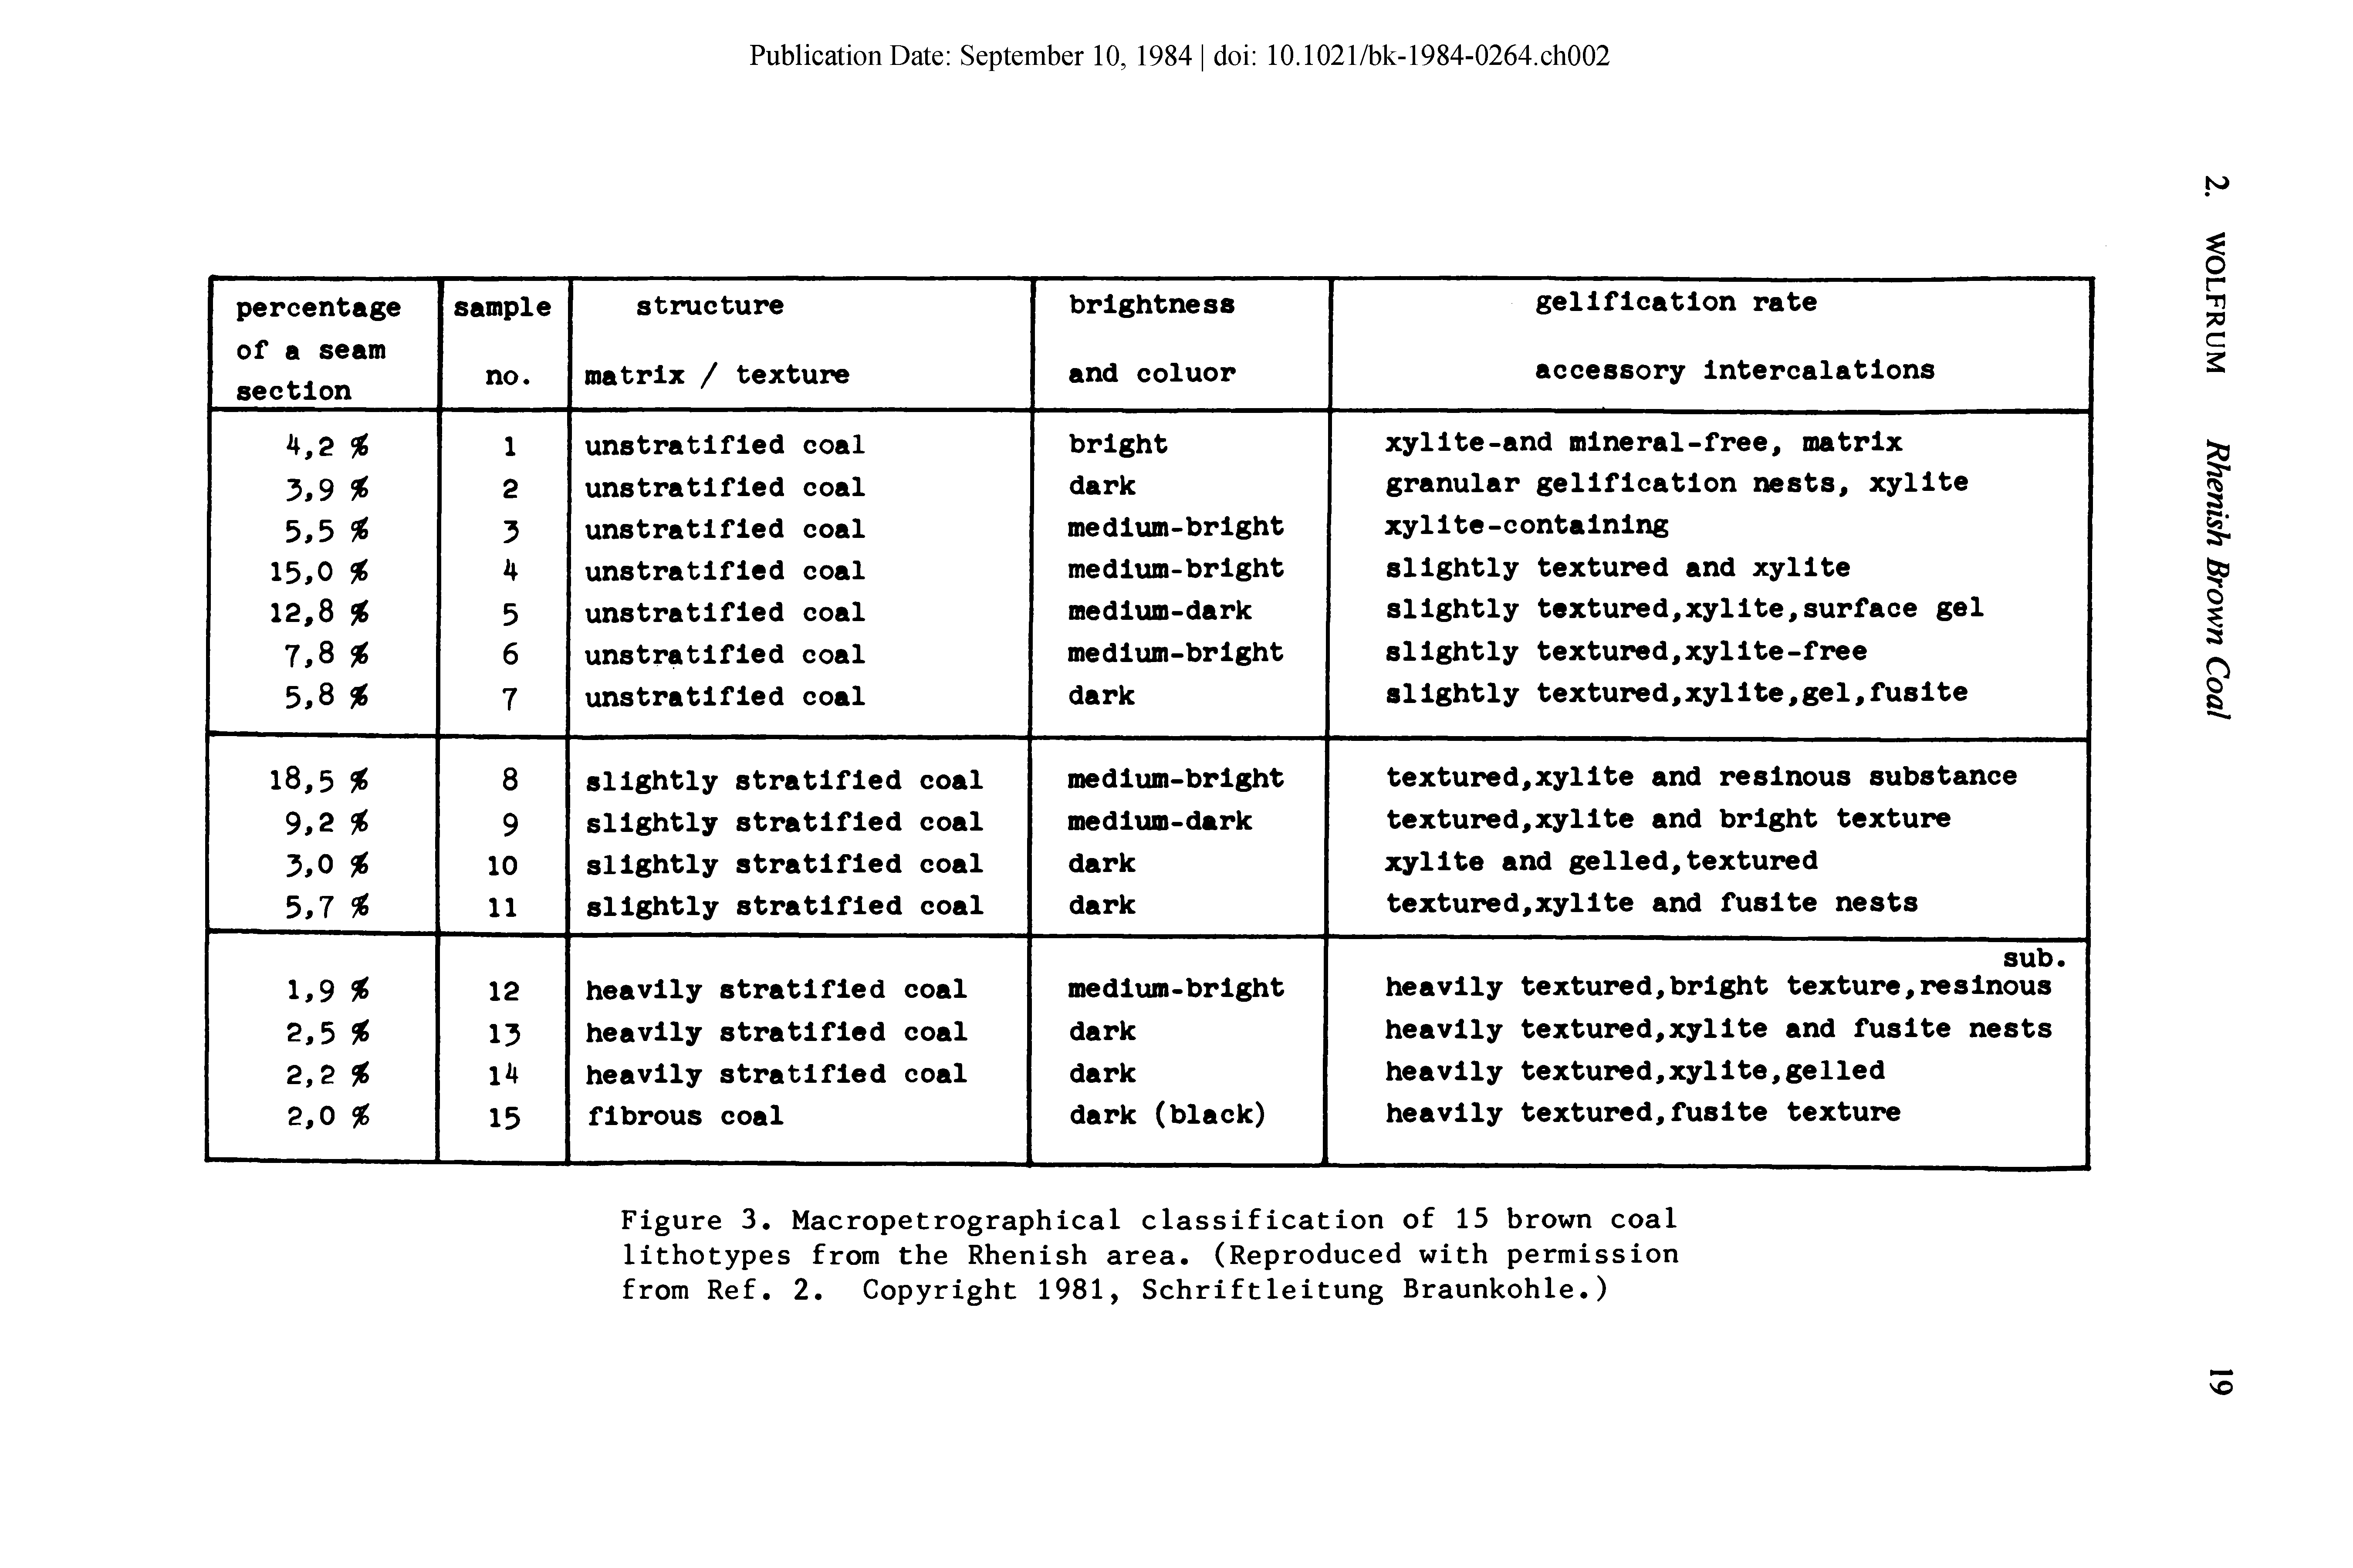 Figure 3. Macropetrographical classification of 15 brown coal lithotypes from the Rhenish area. (Reproduced with permission from Ref. 2. Copyright 1981, Schriftleitung Braunkohle.)...